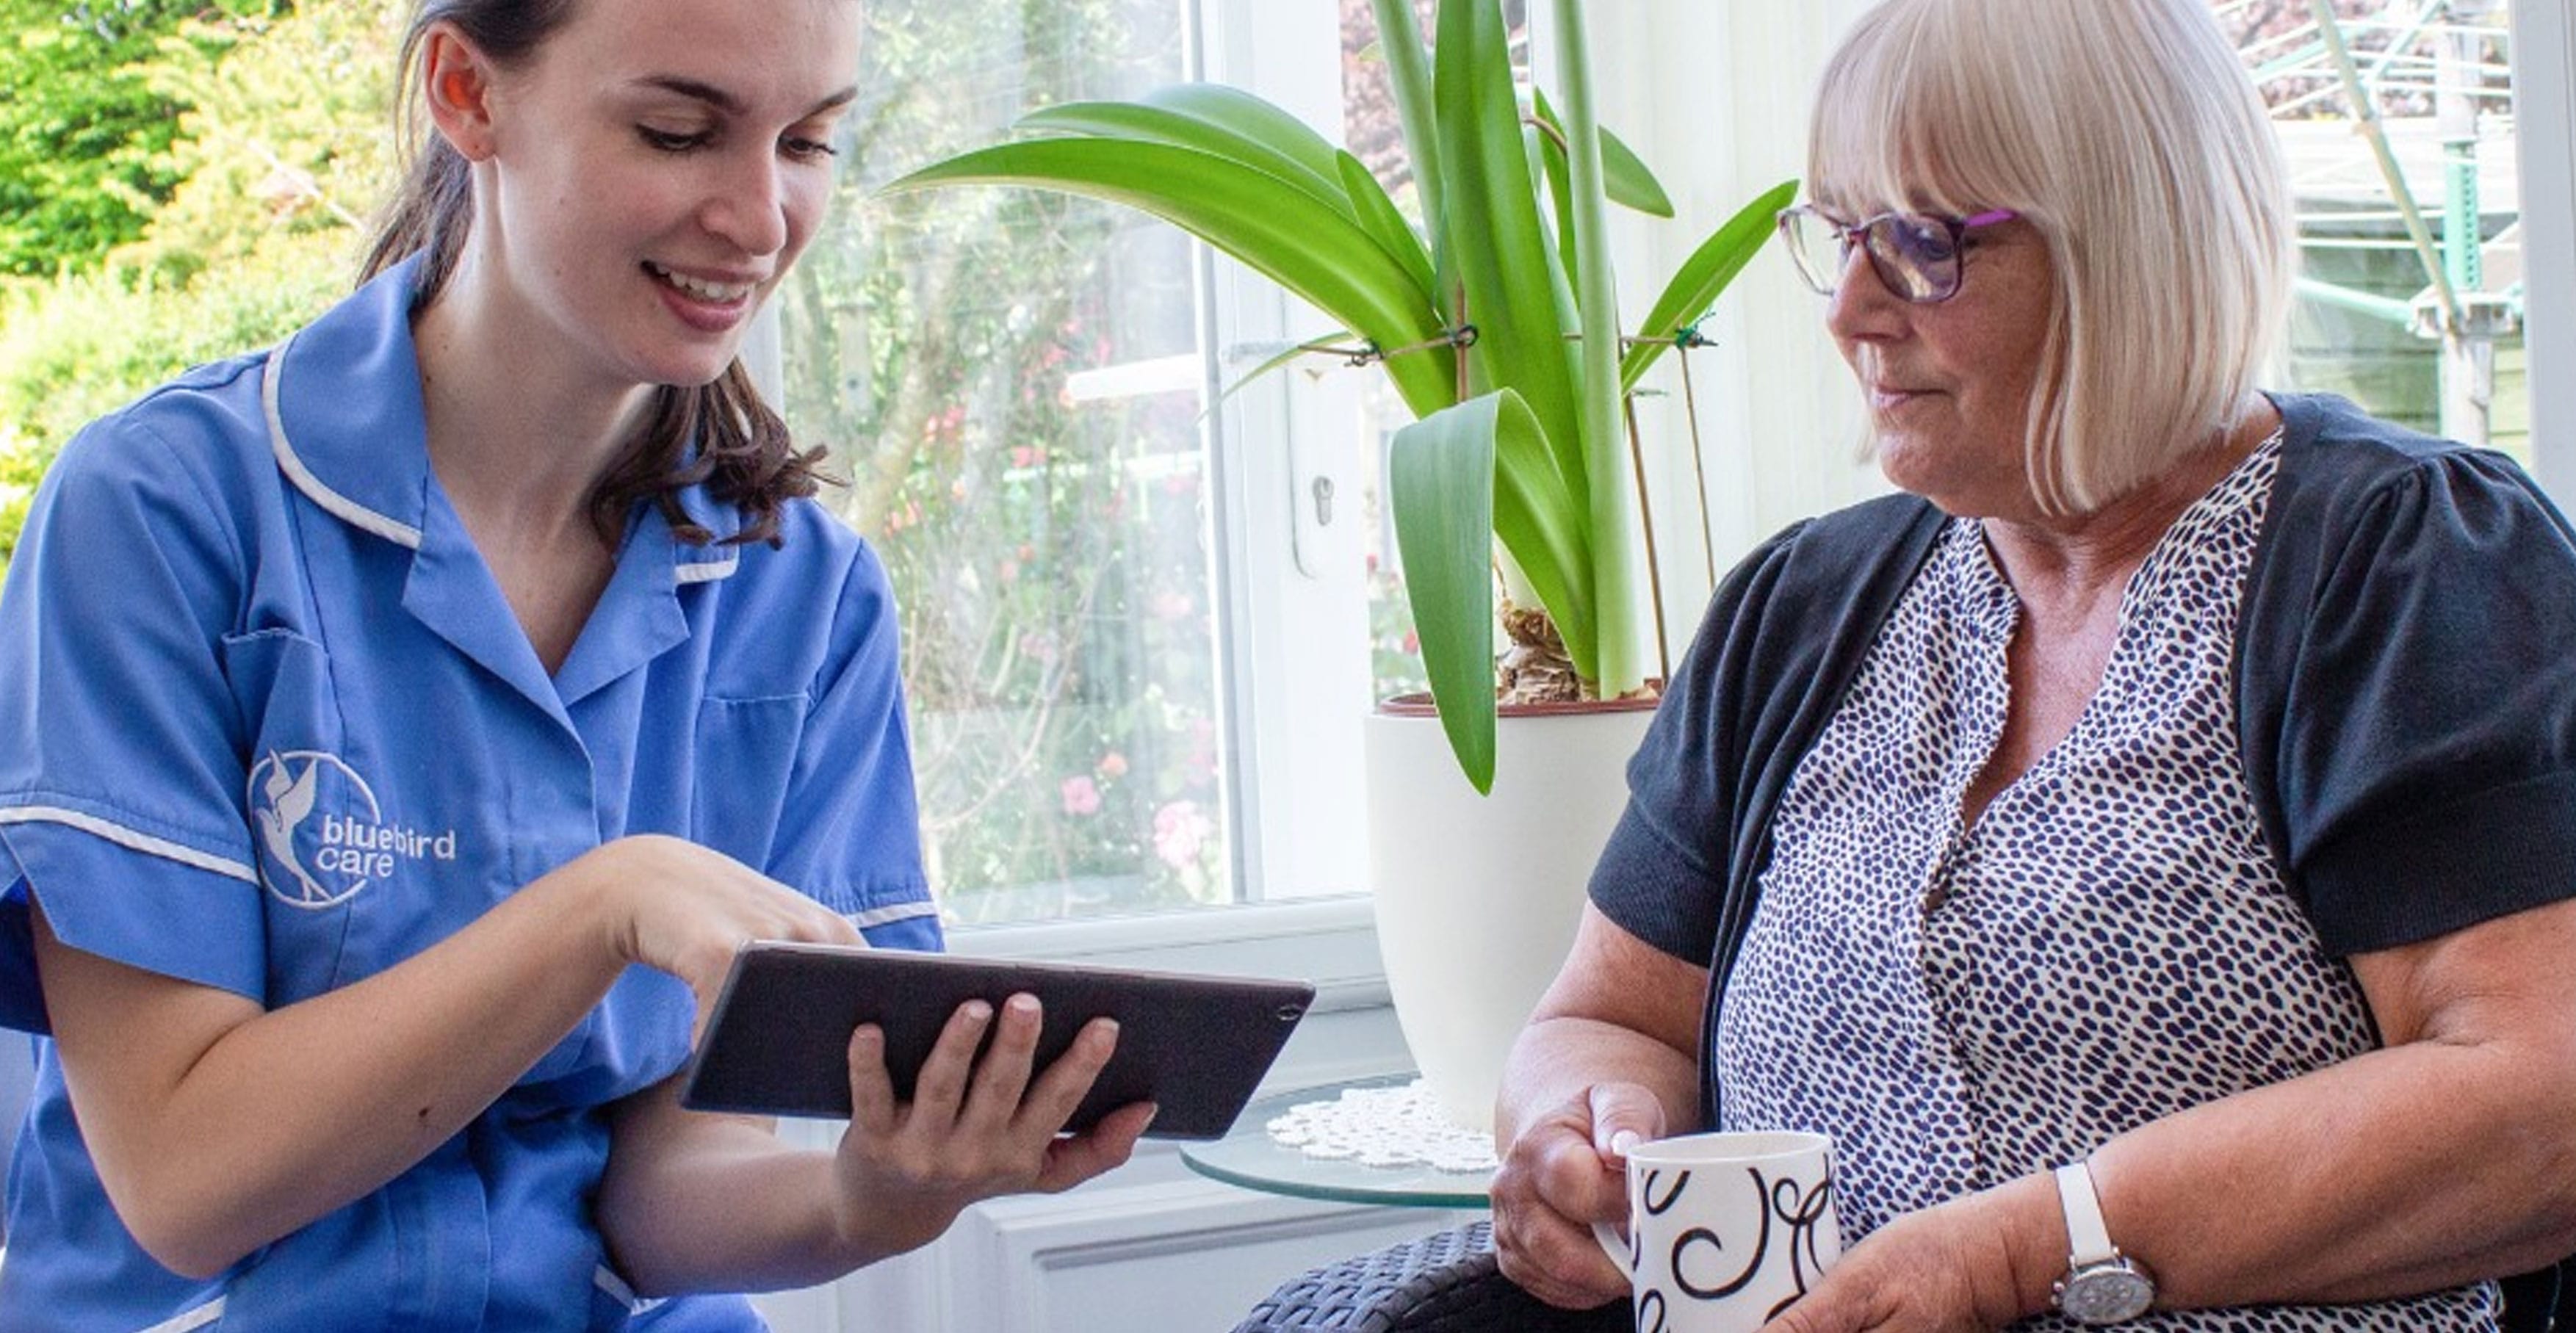 Blue Bird Care assistant showing her tablet to a lady